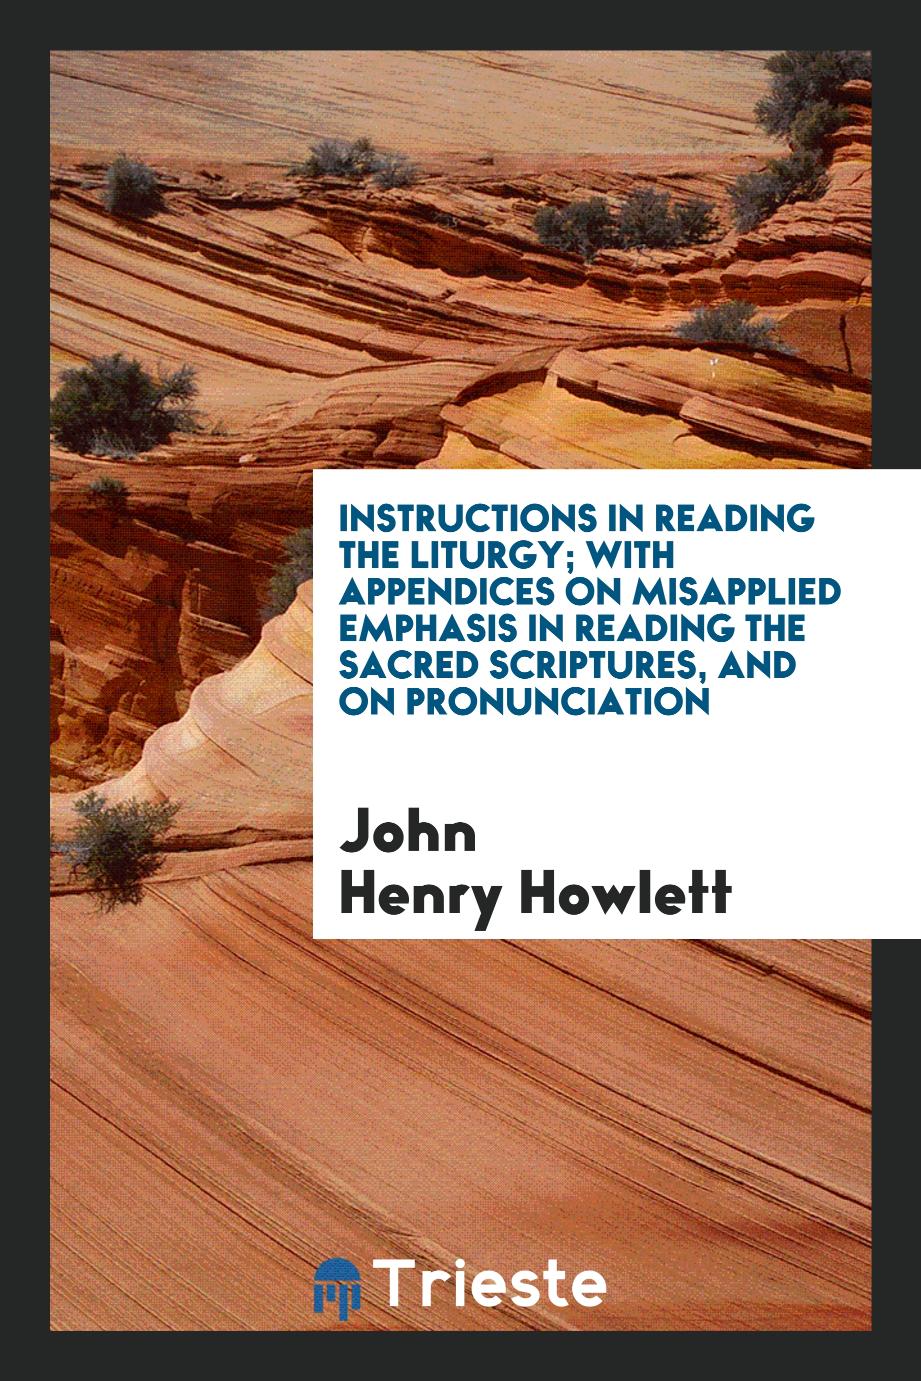 Instructions in Reading the Liturgy; With Appendices on Misapplied Emphasis in Reading the Sacred Scriptures, and on Pronunciation